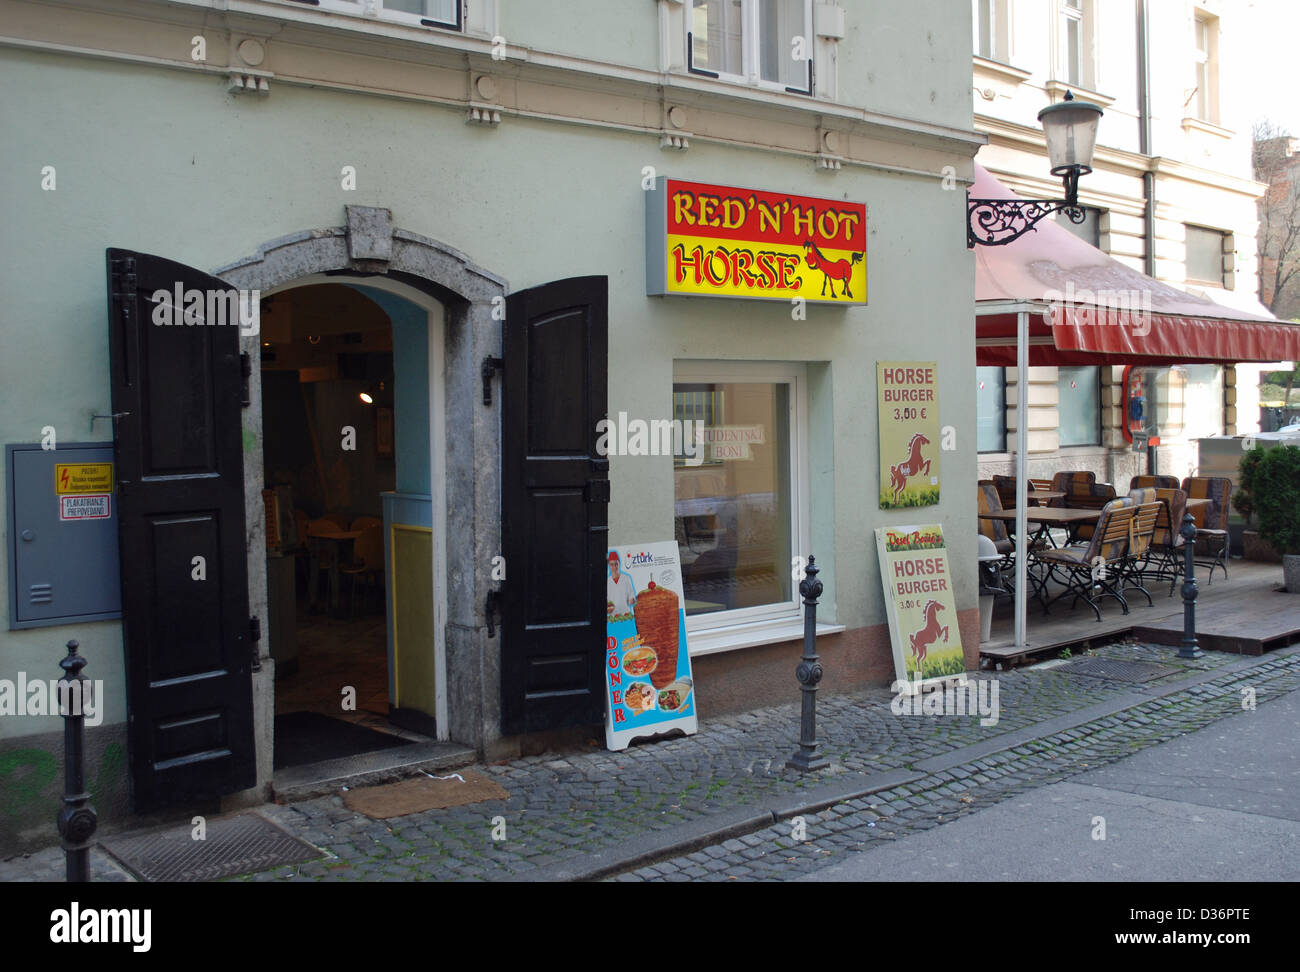 The Red Hot & Horse cafe which sells 'horse burgers' in Ljubljana, Slovenia Stock Photo